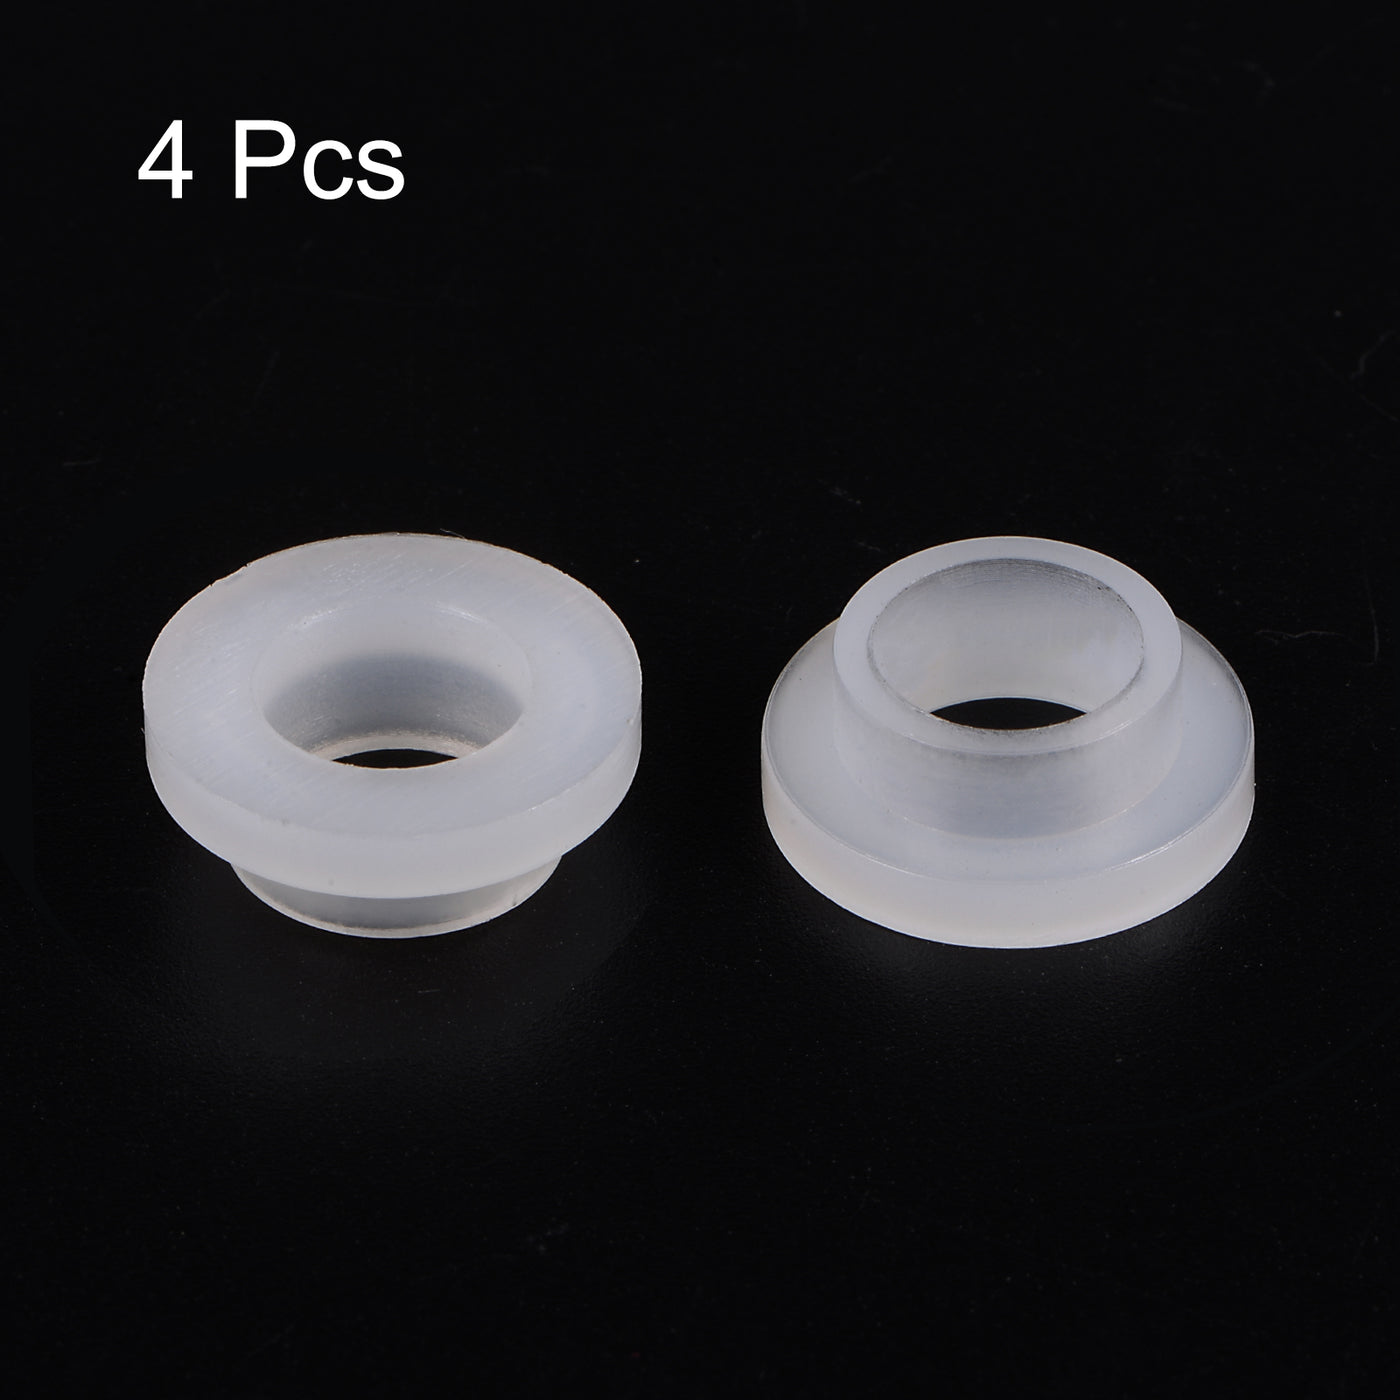 uxcell Uxcell 4pcs Flanged Sleeve Bearings 10mm ID 13mm OD 7mm Length Nylon Bushings, White